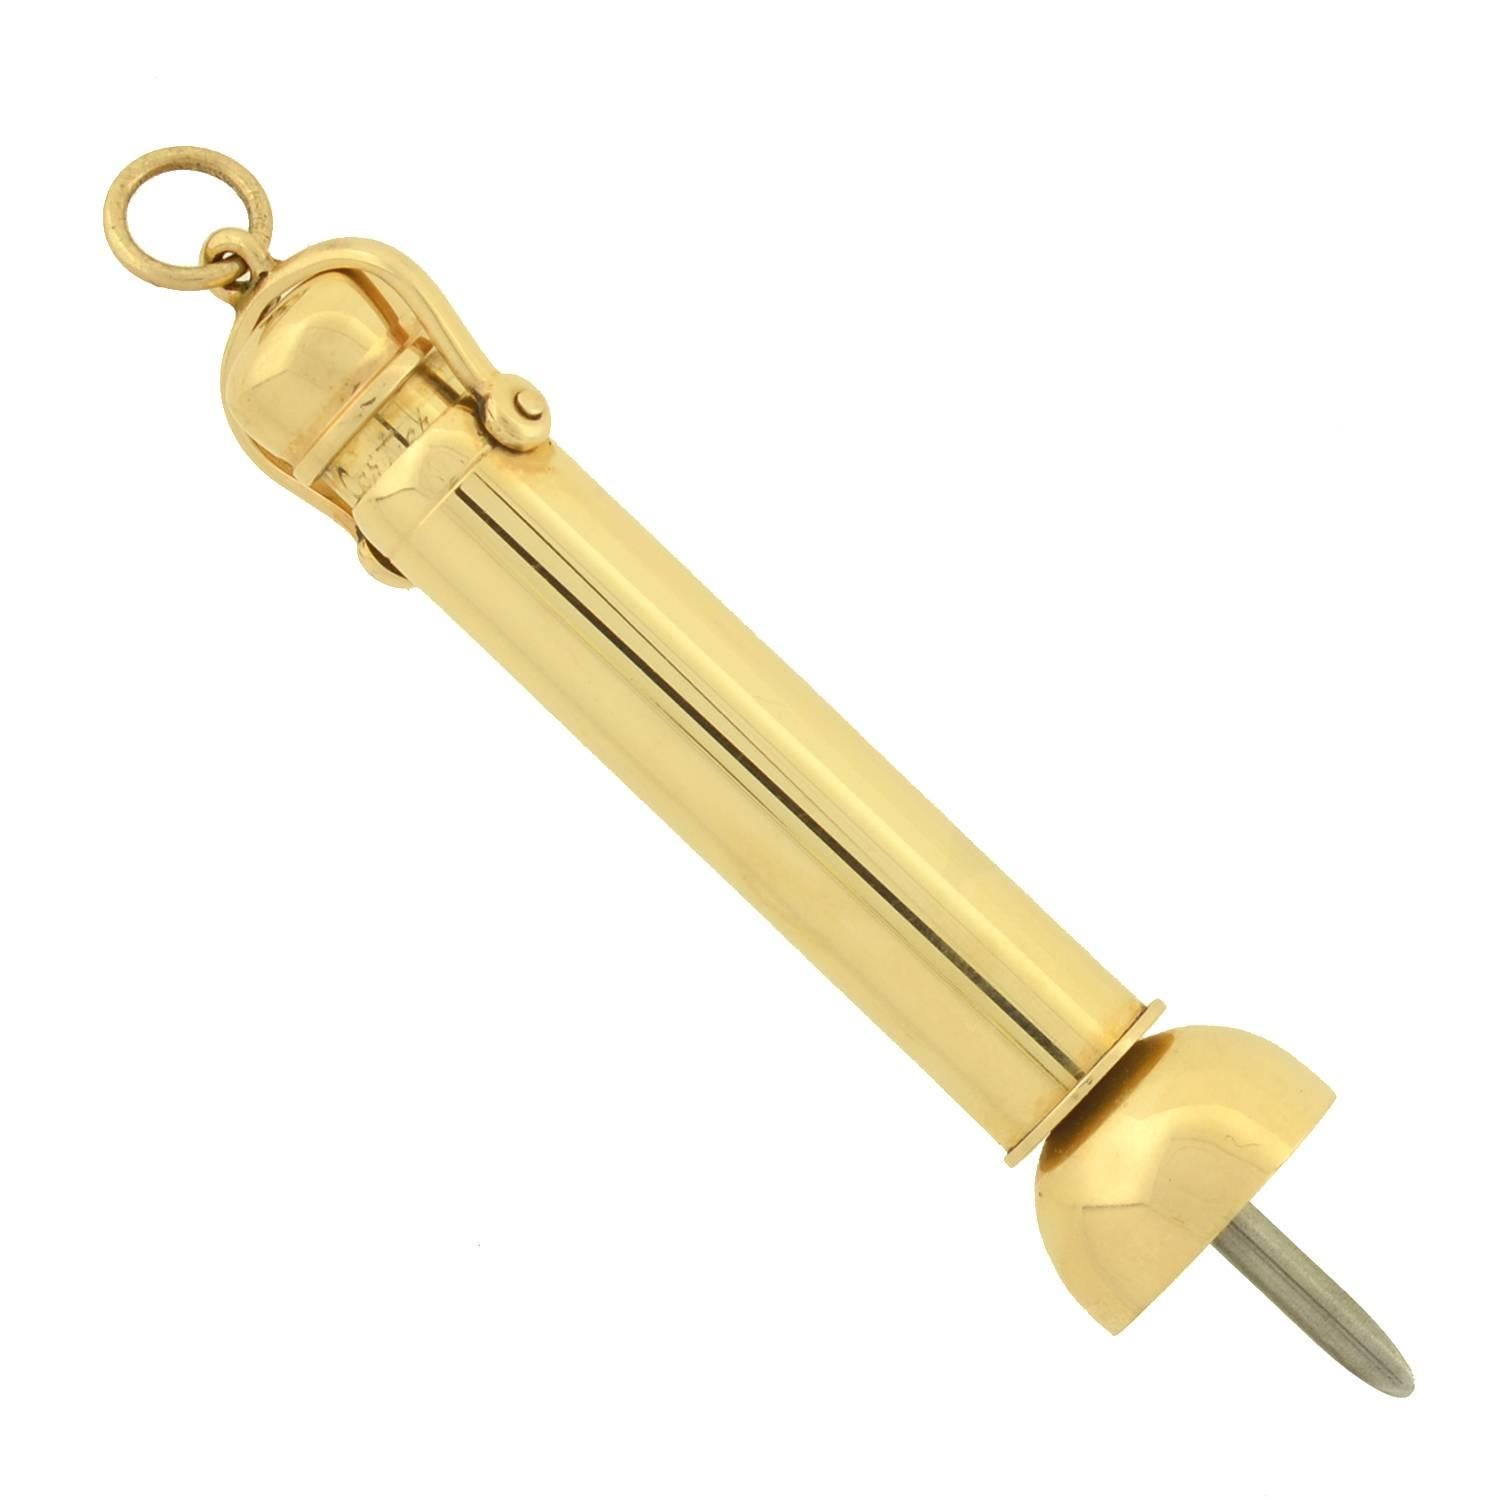 This stylish gold cigar punch from the Art Deco era (ca1930s) is a signed piece by Cartier! Made of solid 14kt gold, the piece is a functioning cigar punch, which would originally have been worn as a fob hanging from a gentleman's watch chain. The